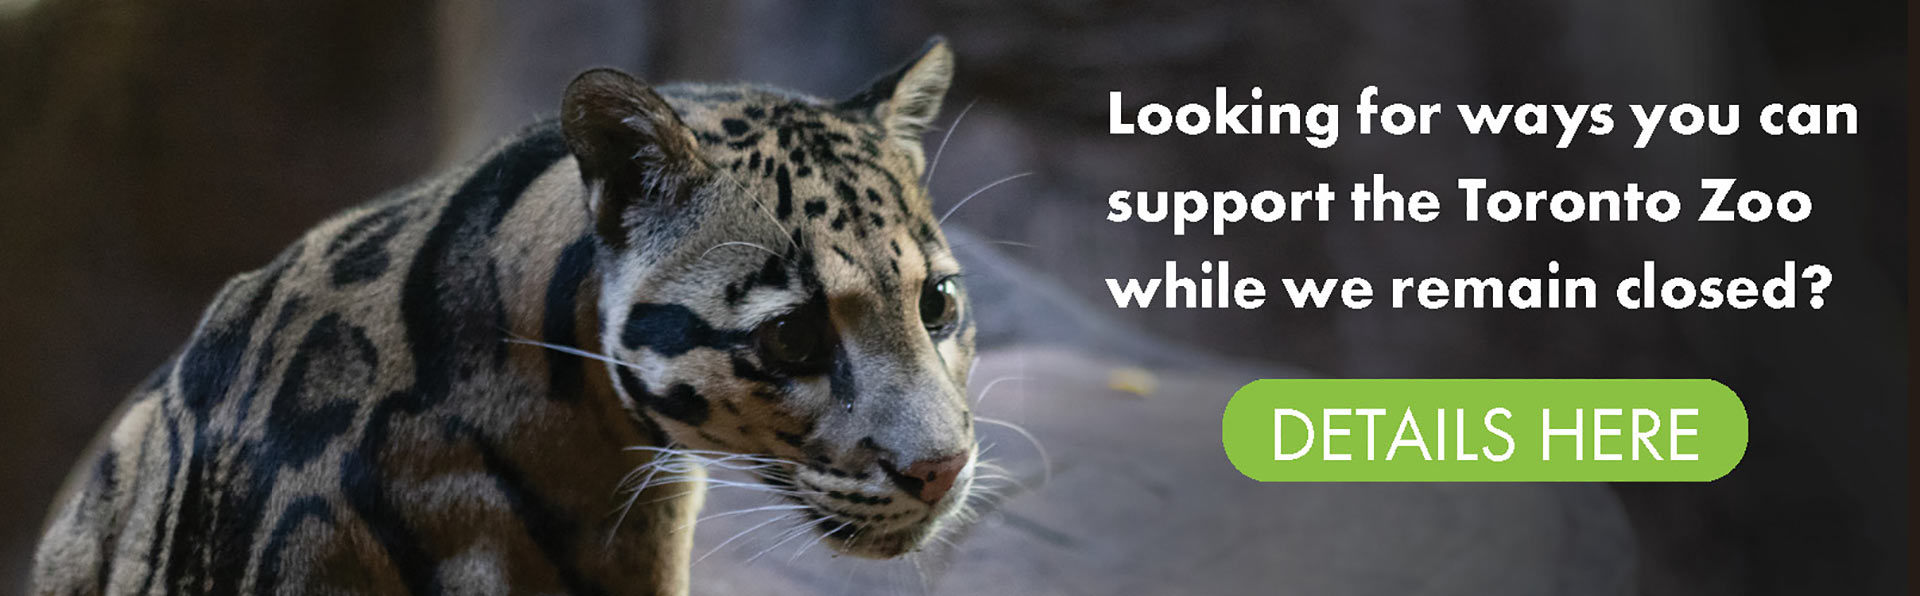 Looking for ways you can support the Toronto Zoo while we remain closed?